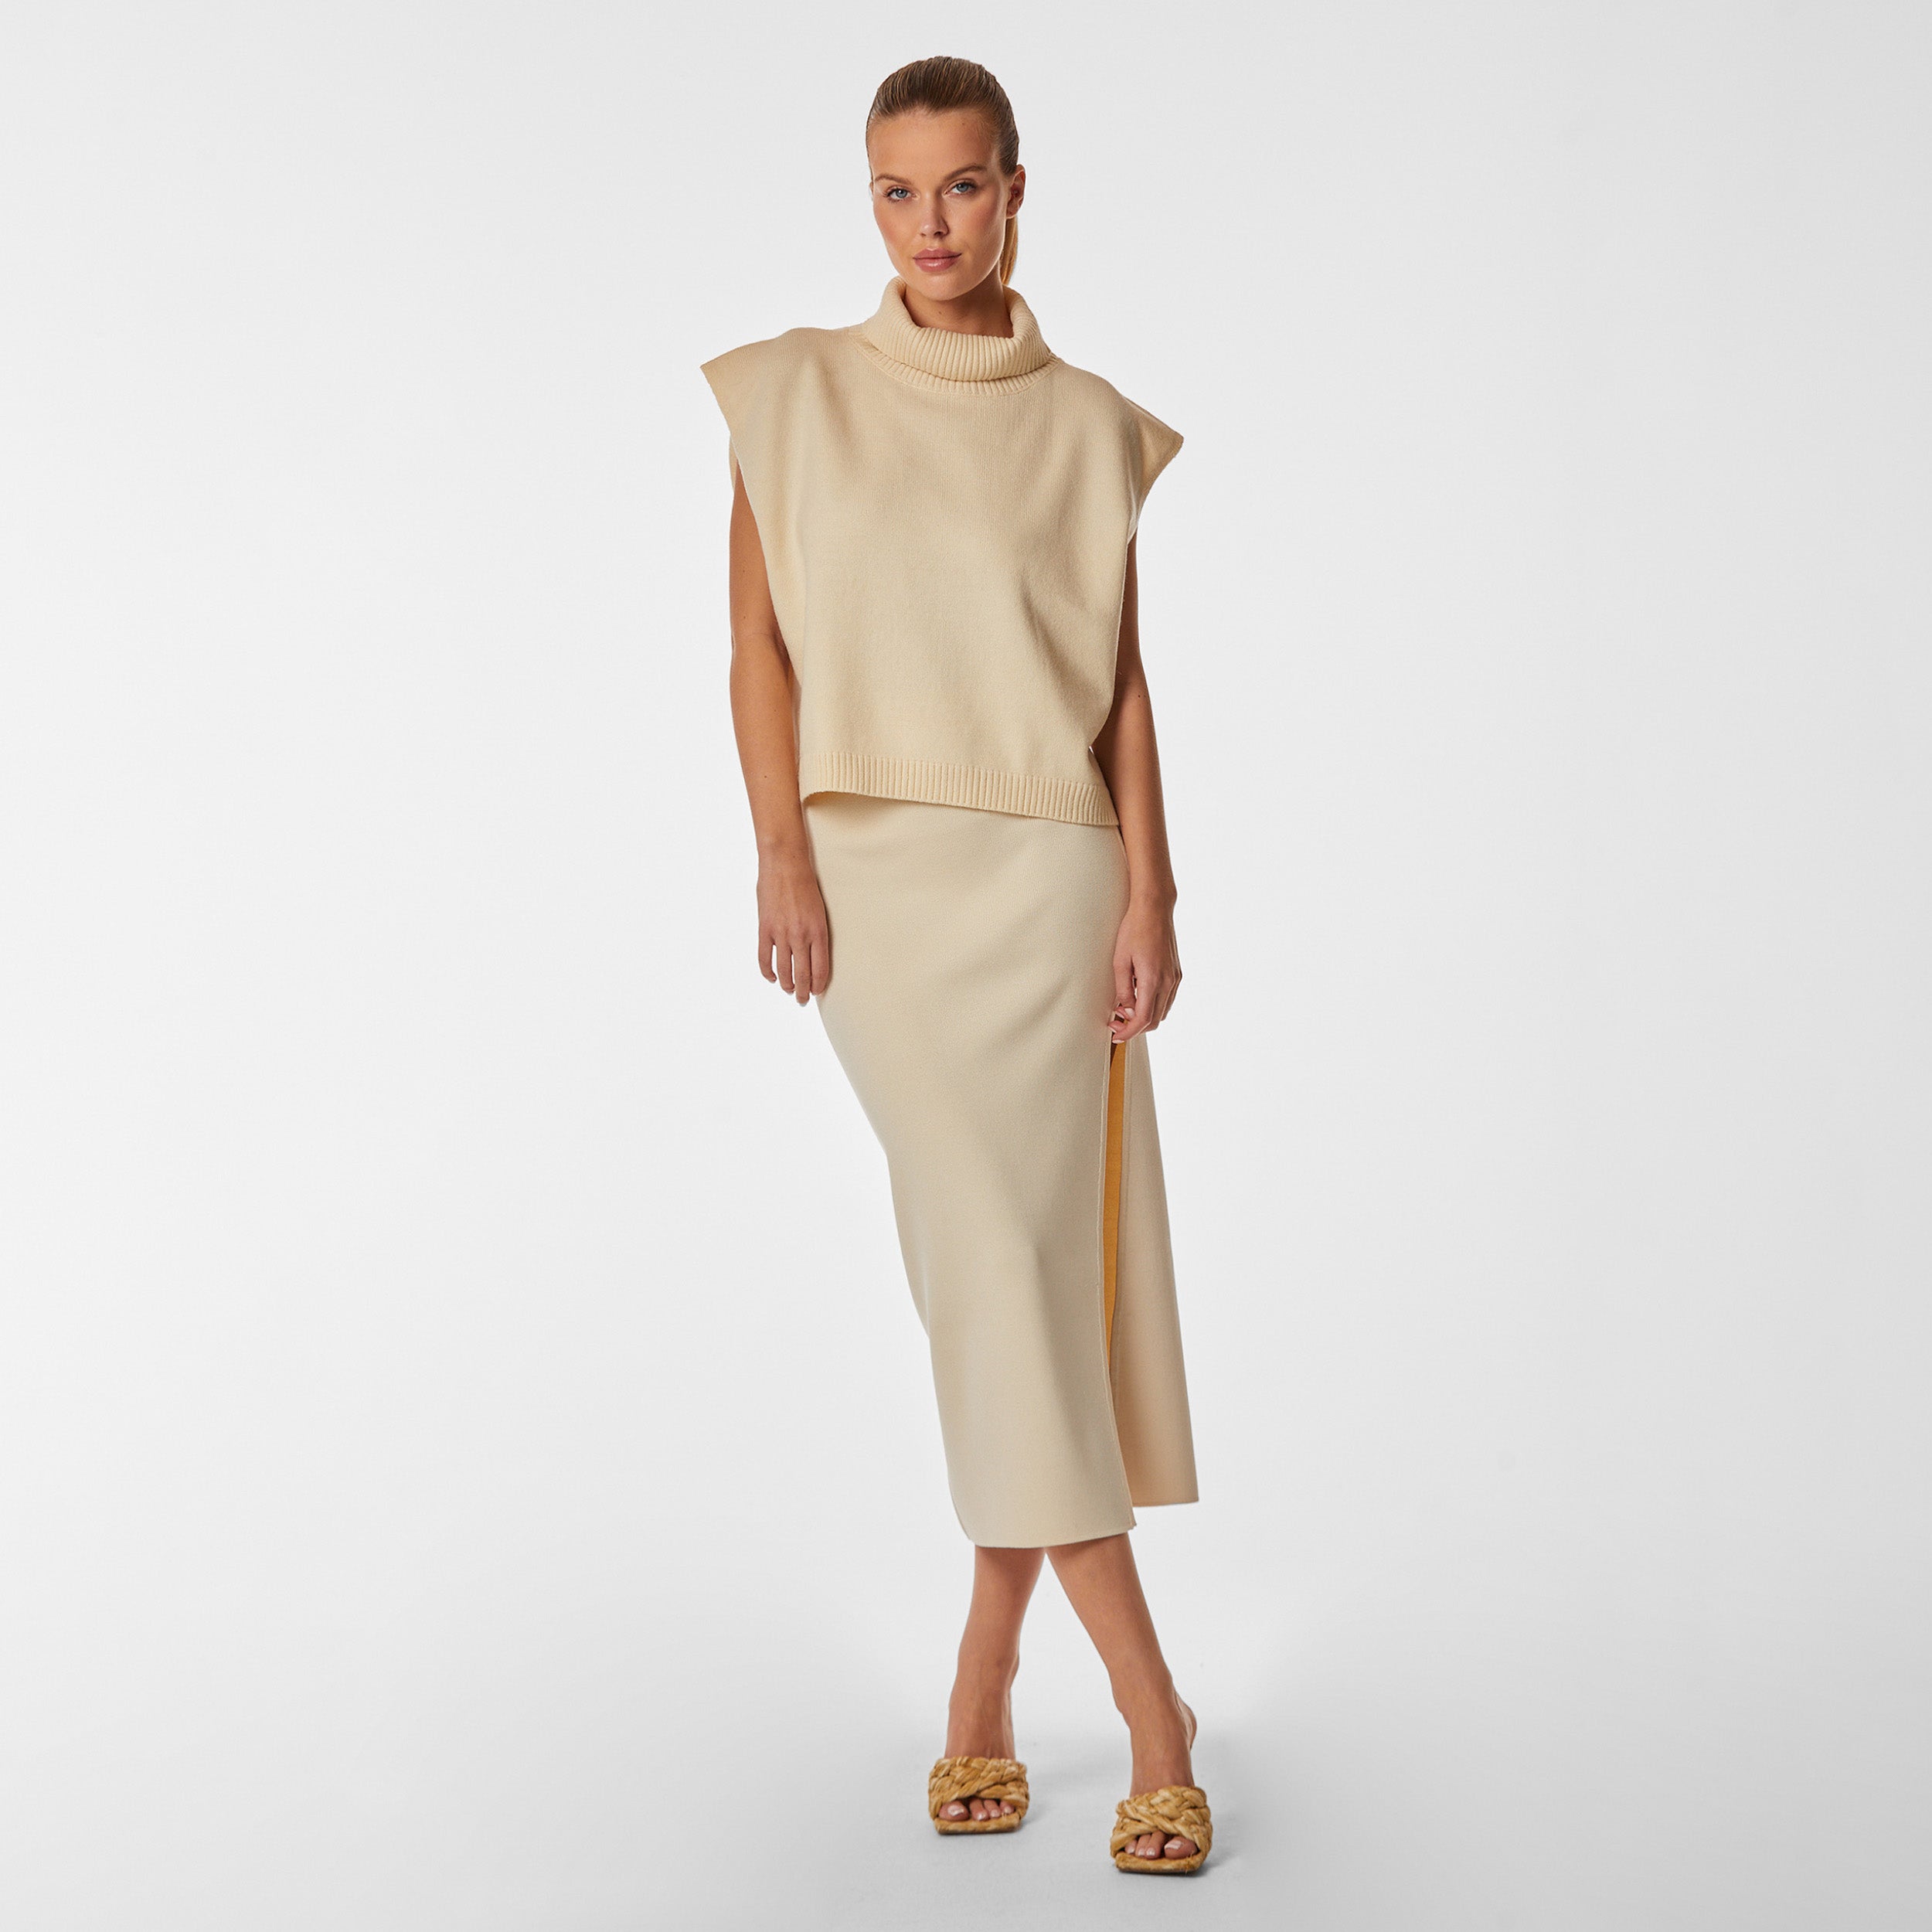 Full body front view of woman wearing sleeveless pearl sweater and pearl midi skirt